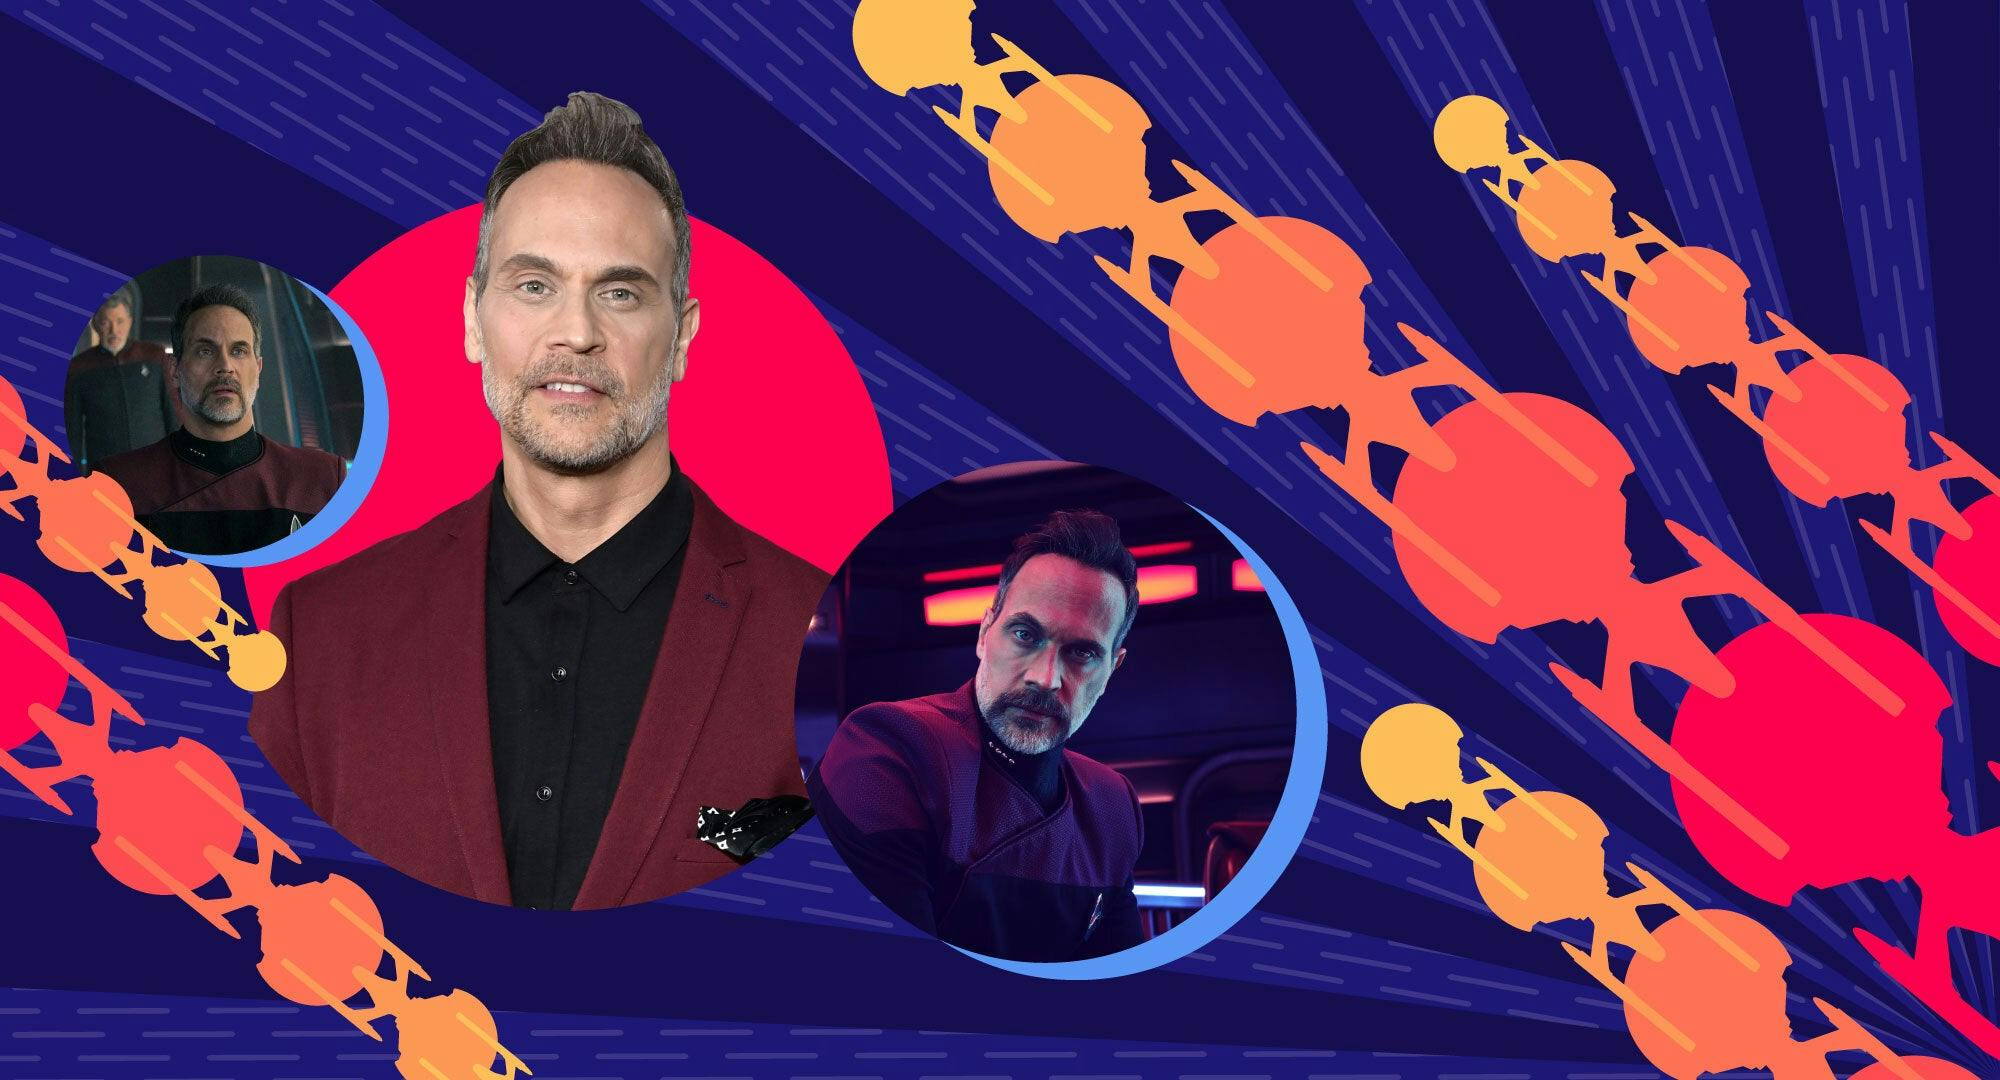 Illustrated banner featuring Todd Stashwick and his Star Trek: Picard character Captain Liam Shaw